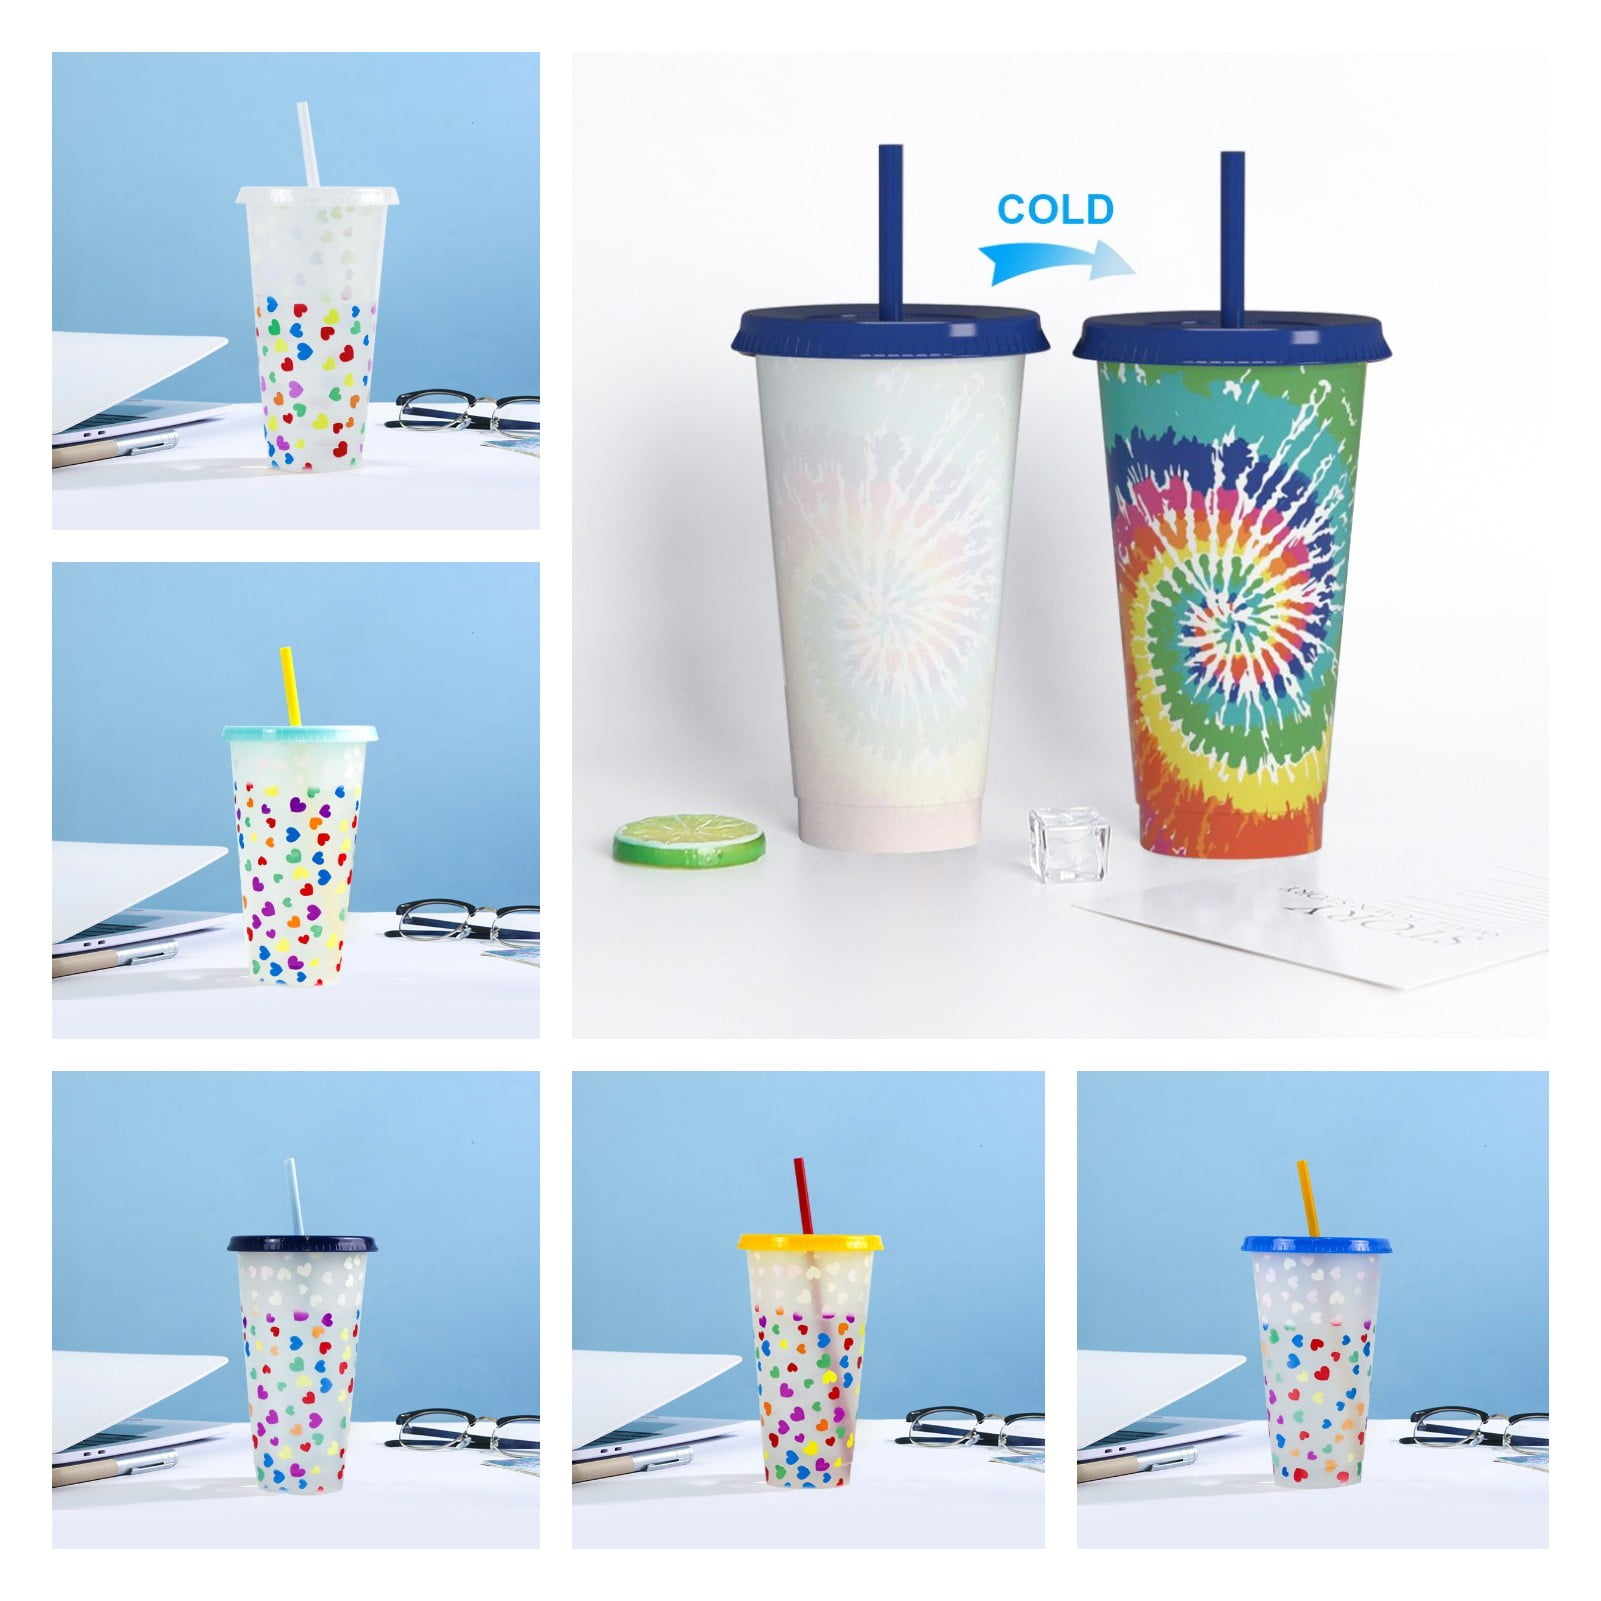 Cheers US 420ml Sequin Travel Coffee Mug Tumblers with Lids Straws Kids Tumblers Reusable Plastic Cold Cups with Lid Insulated Tumbler Cup Funny Mug